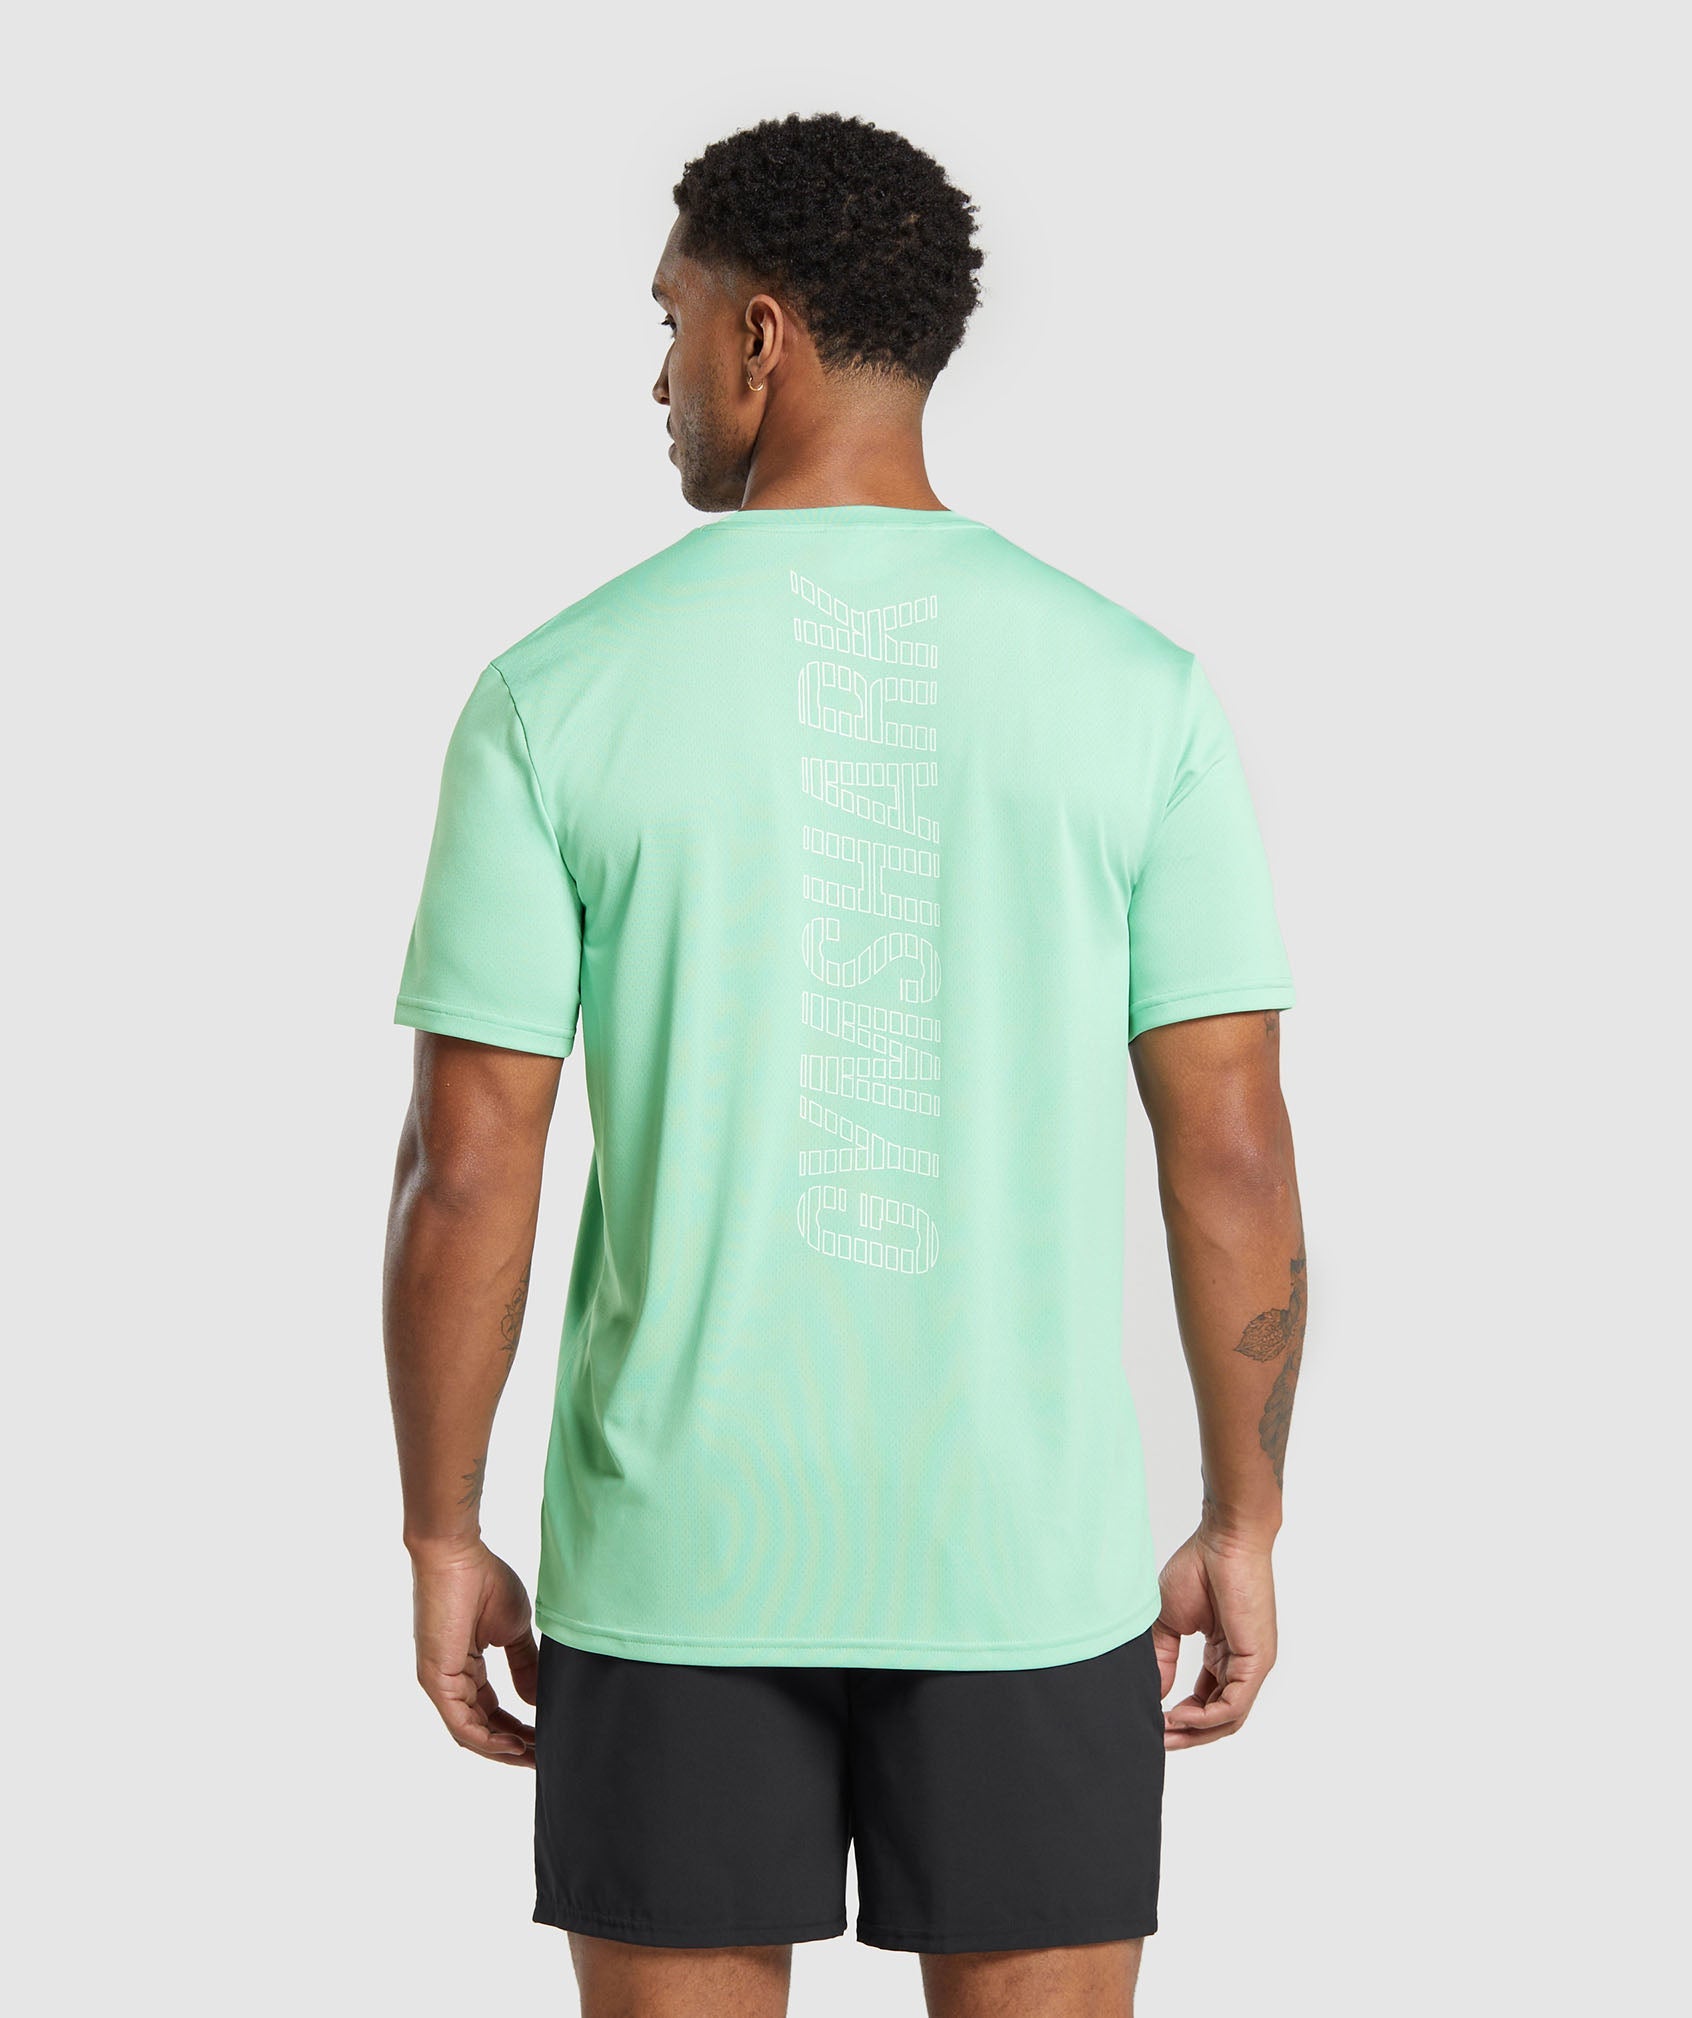 Conditioning Goods T-Shirt in Lido Green - view 2